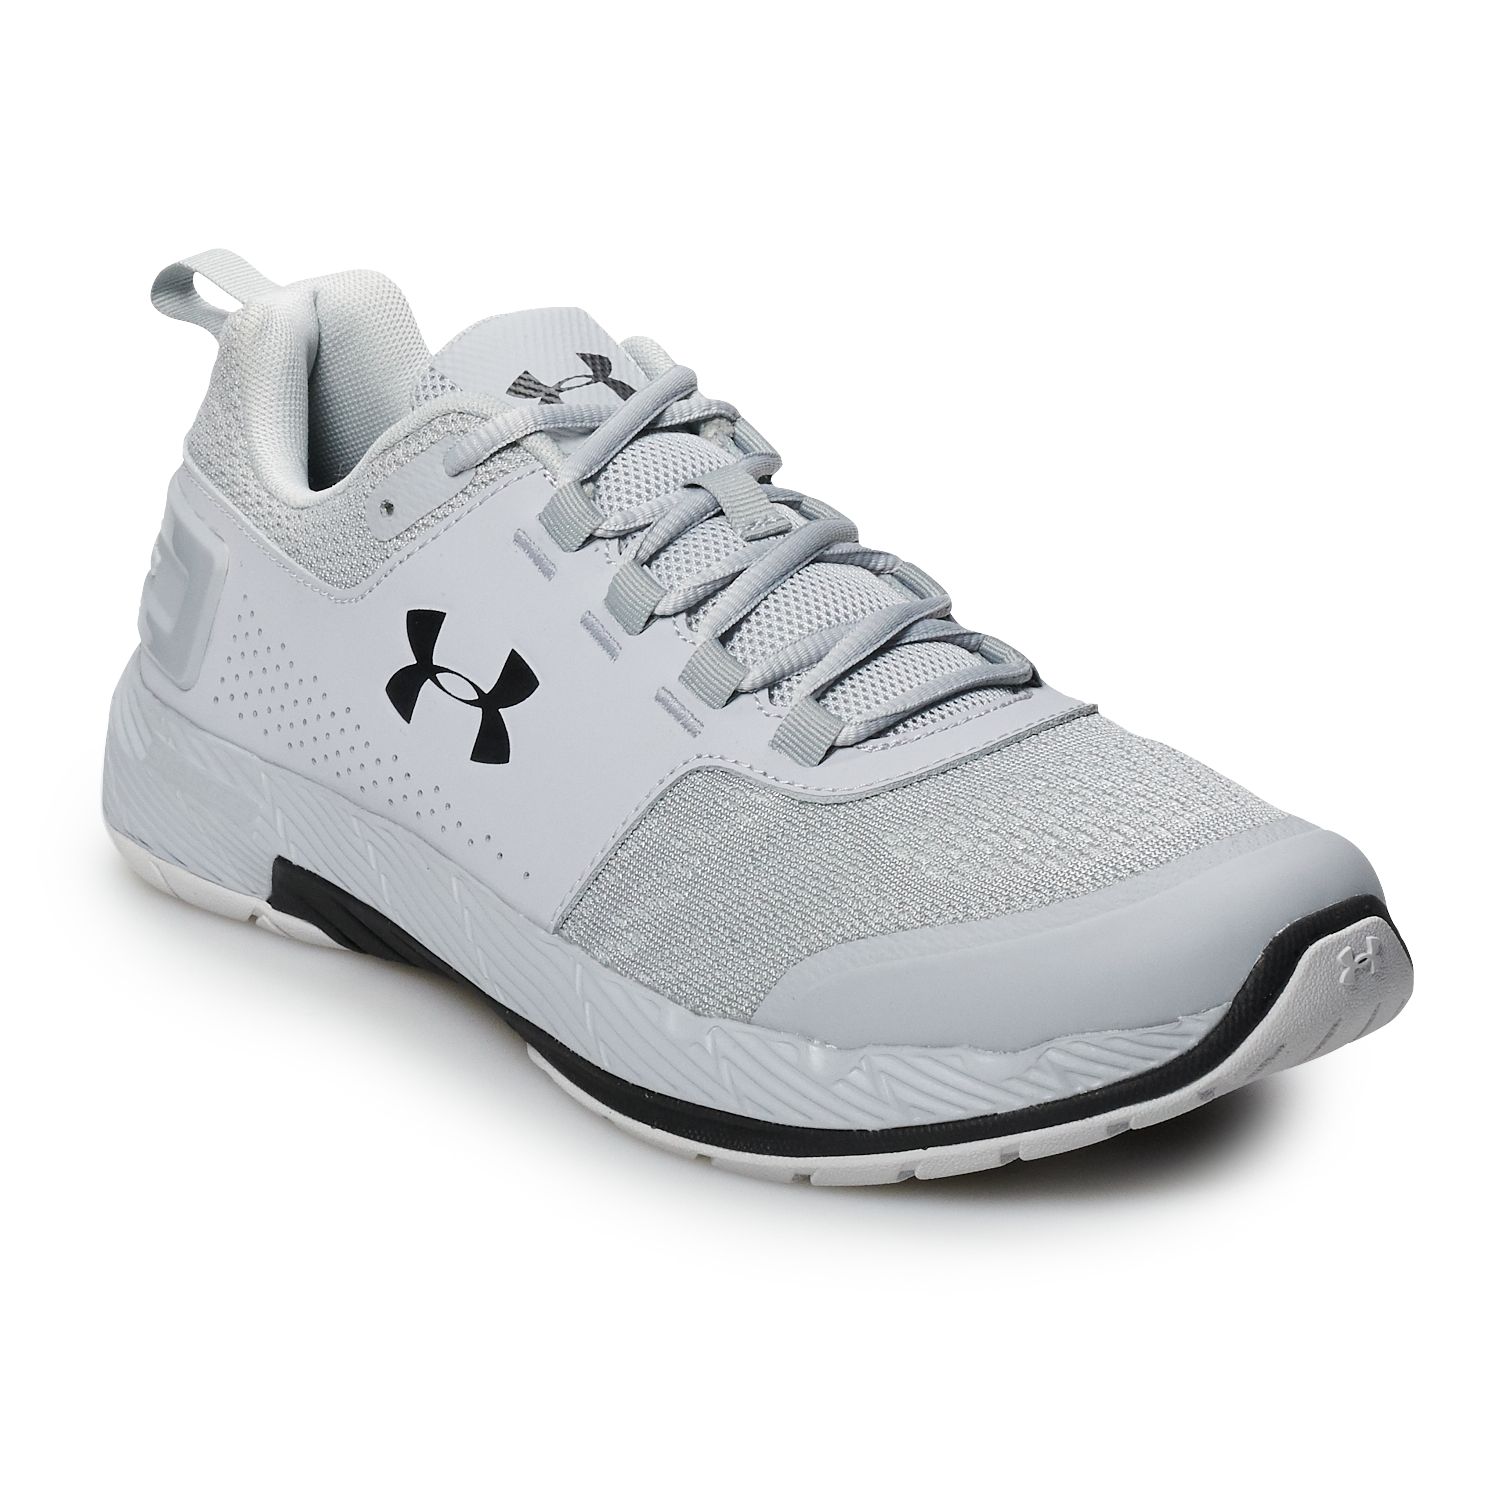 grey and black under armour shoes